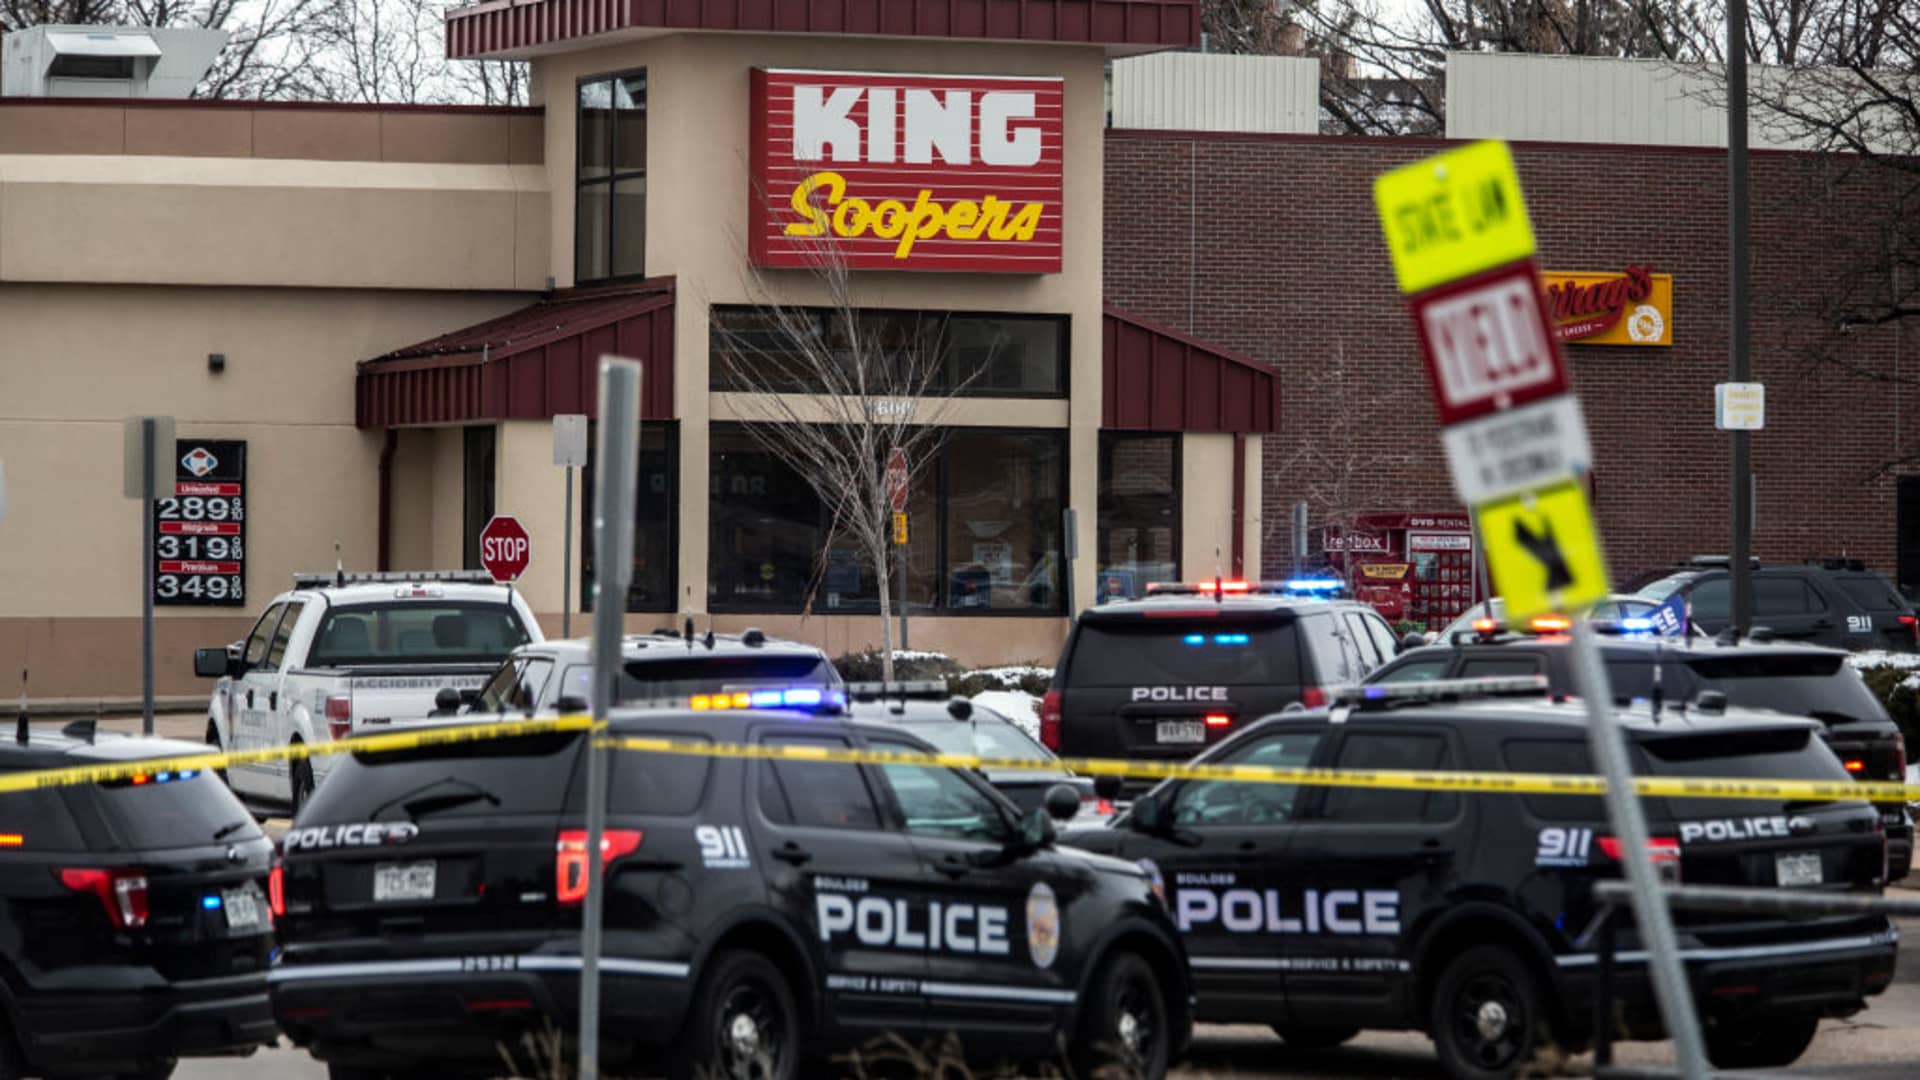 Police respond at a King Sooper's grocery store where a gunman opened fire on March 22, 2021 in Boulder, Colorado. Ten people, including a police officer, were killed in the attack.